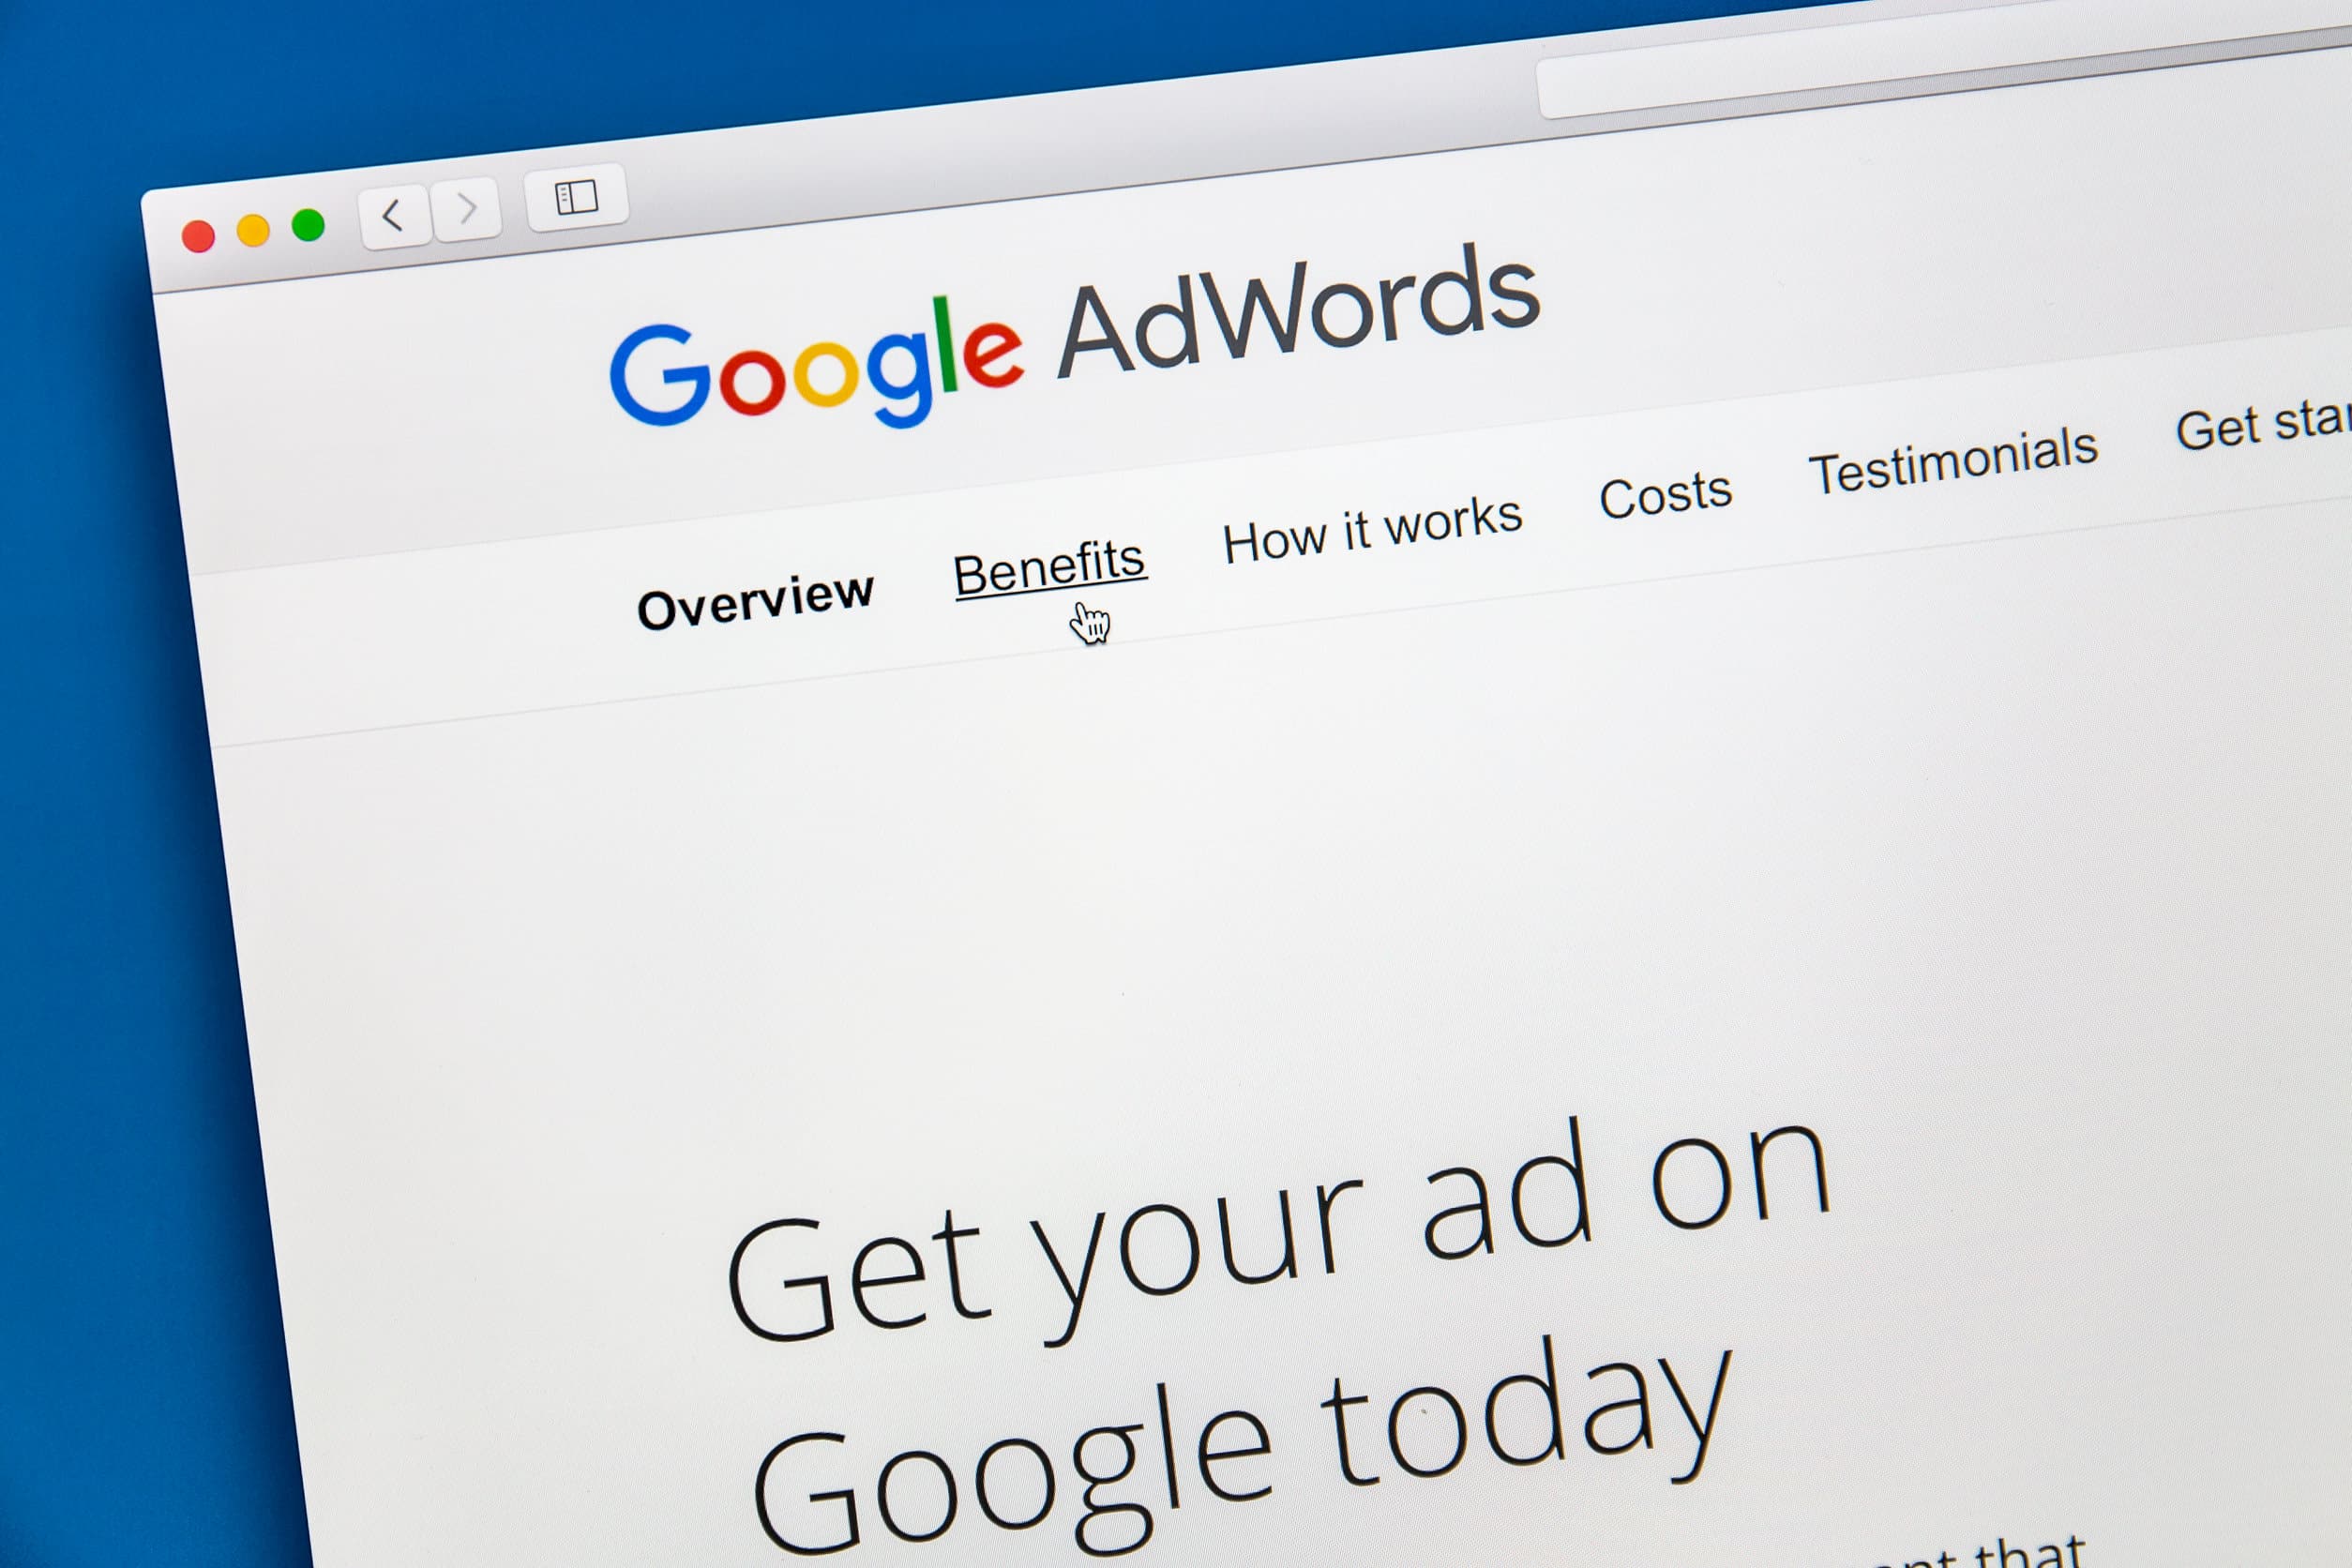 5 Tips To Run a Successful Google AdWords Campaign